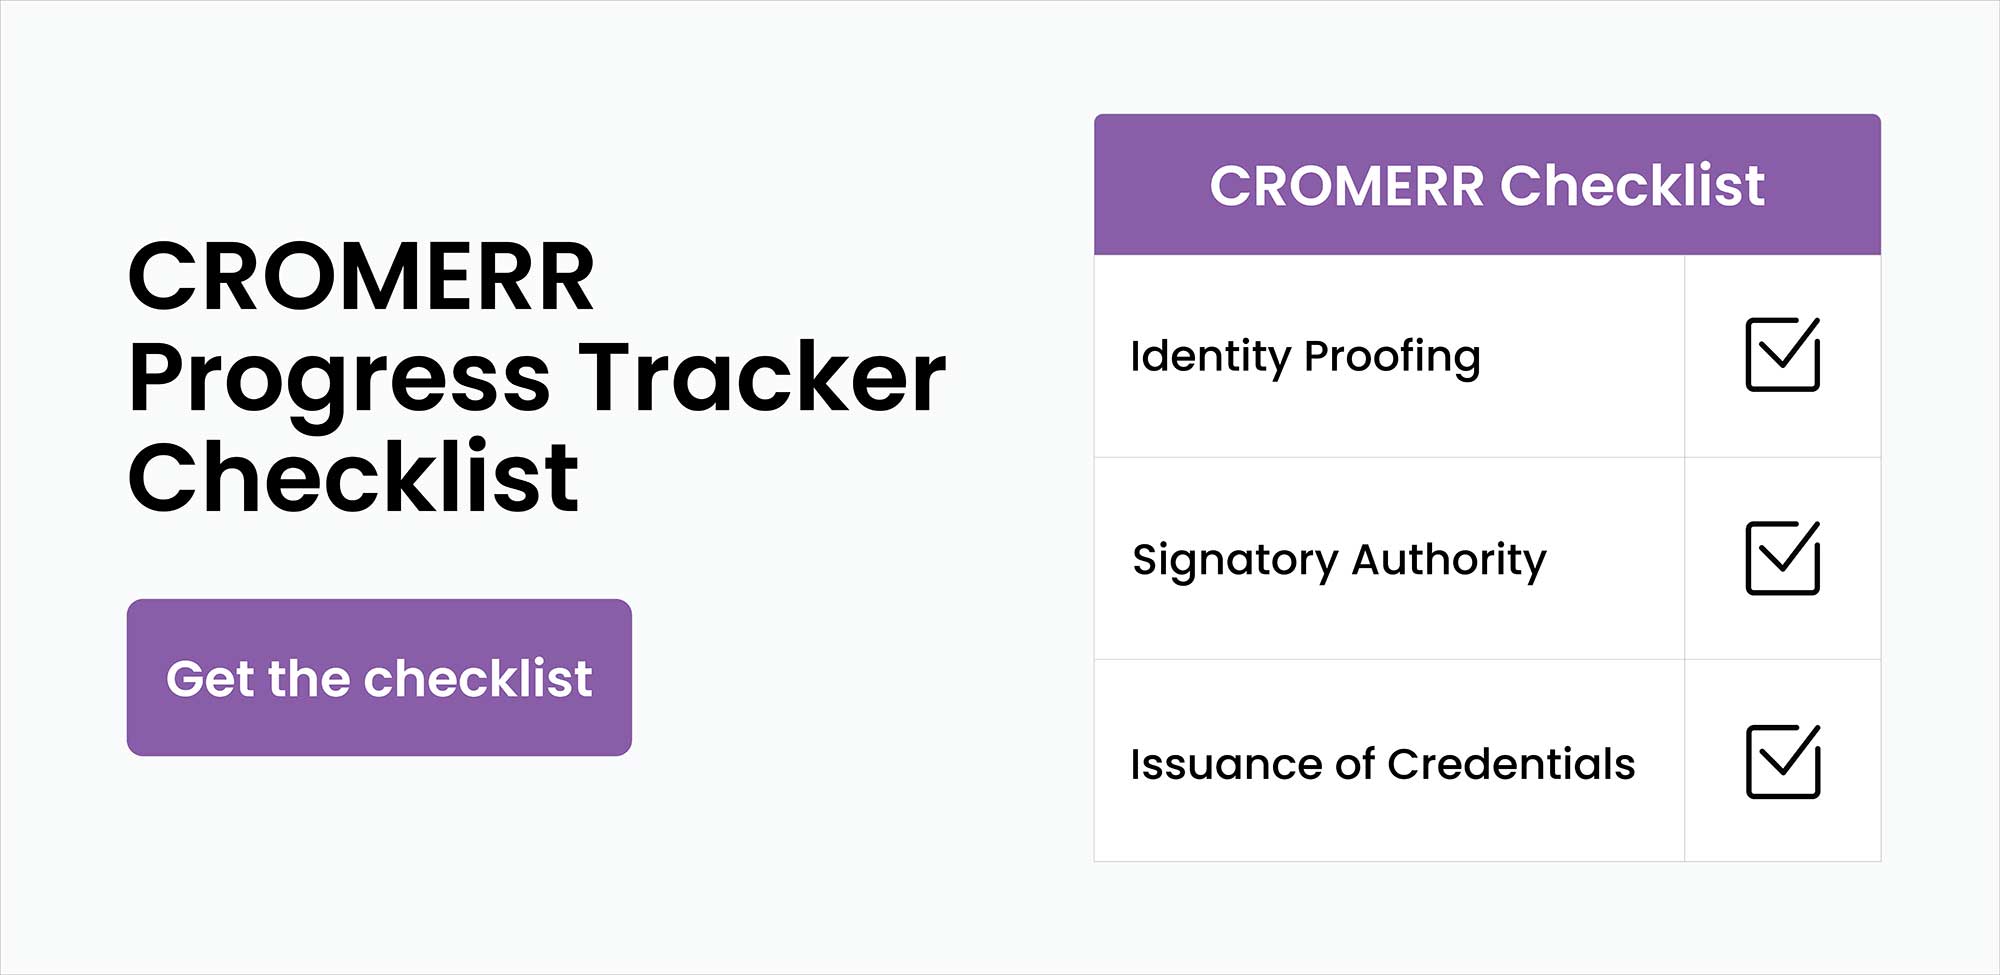 Progress tracker visualization for CROMERR application stages, including identity proofing, signatory authority and issuance of credentials